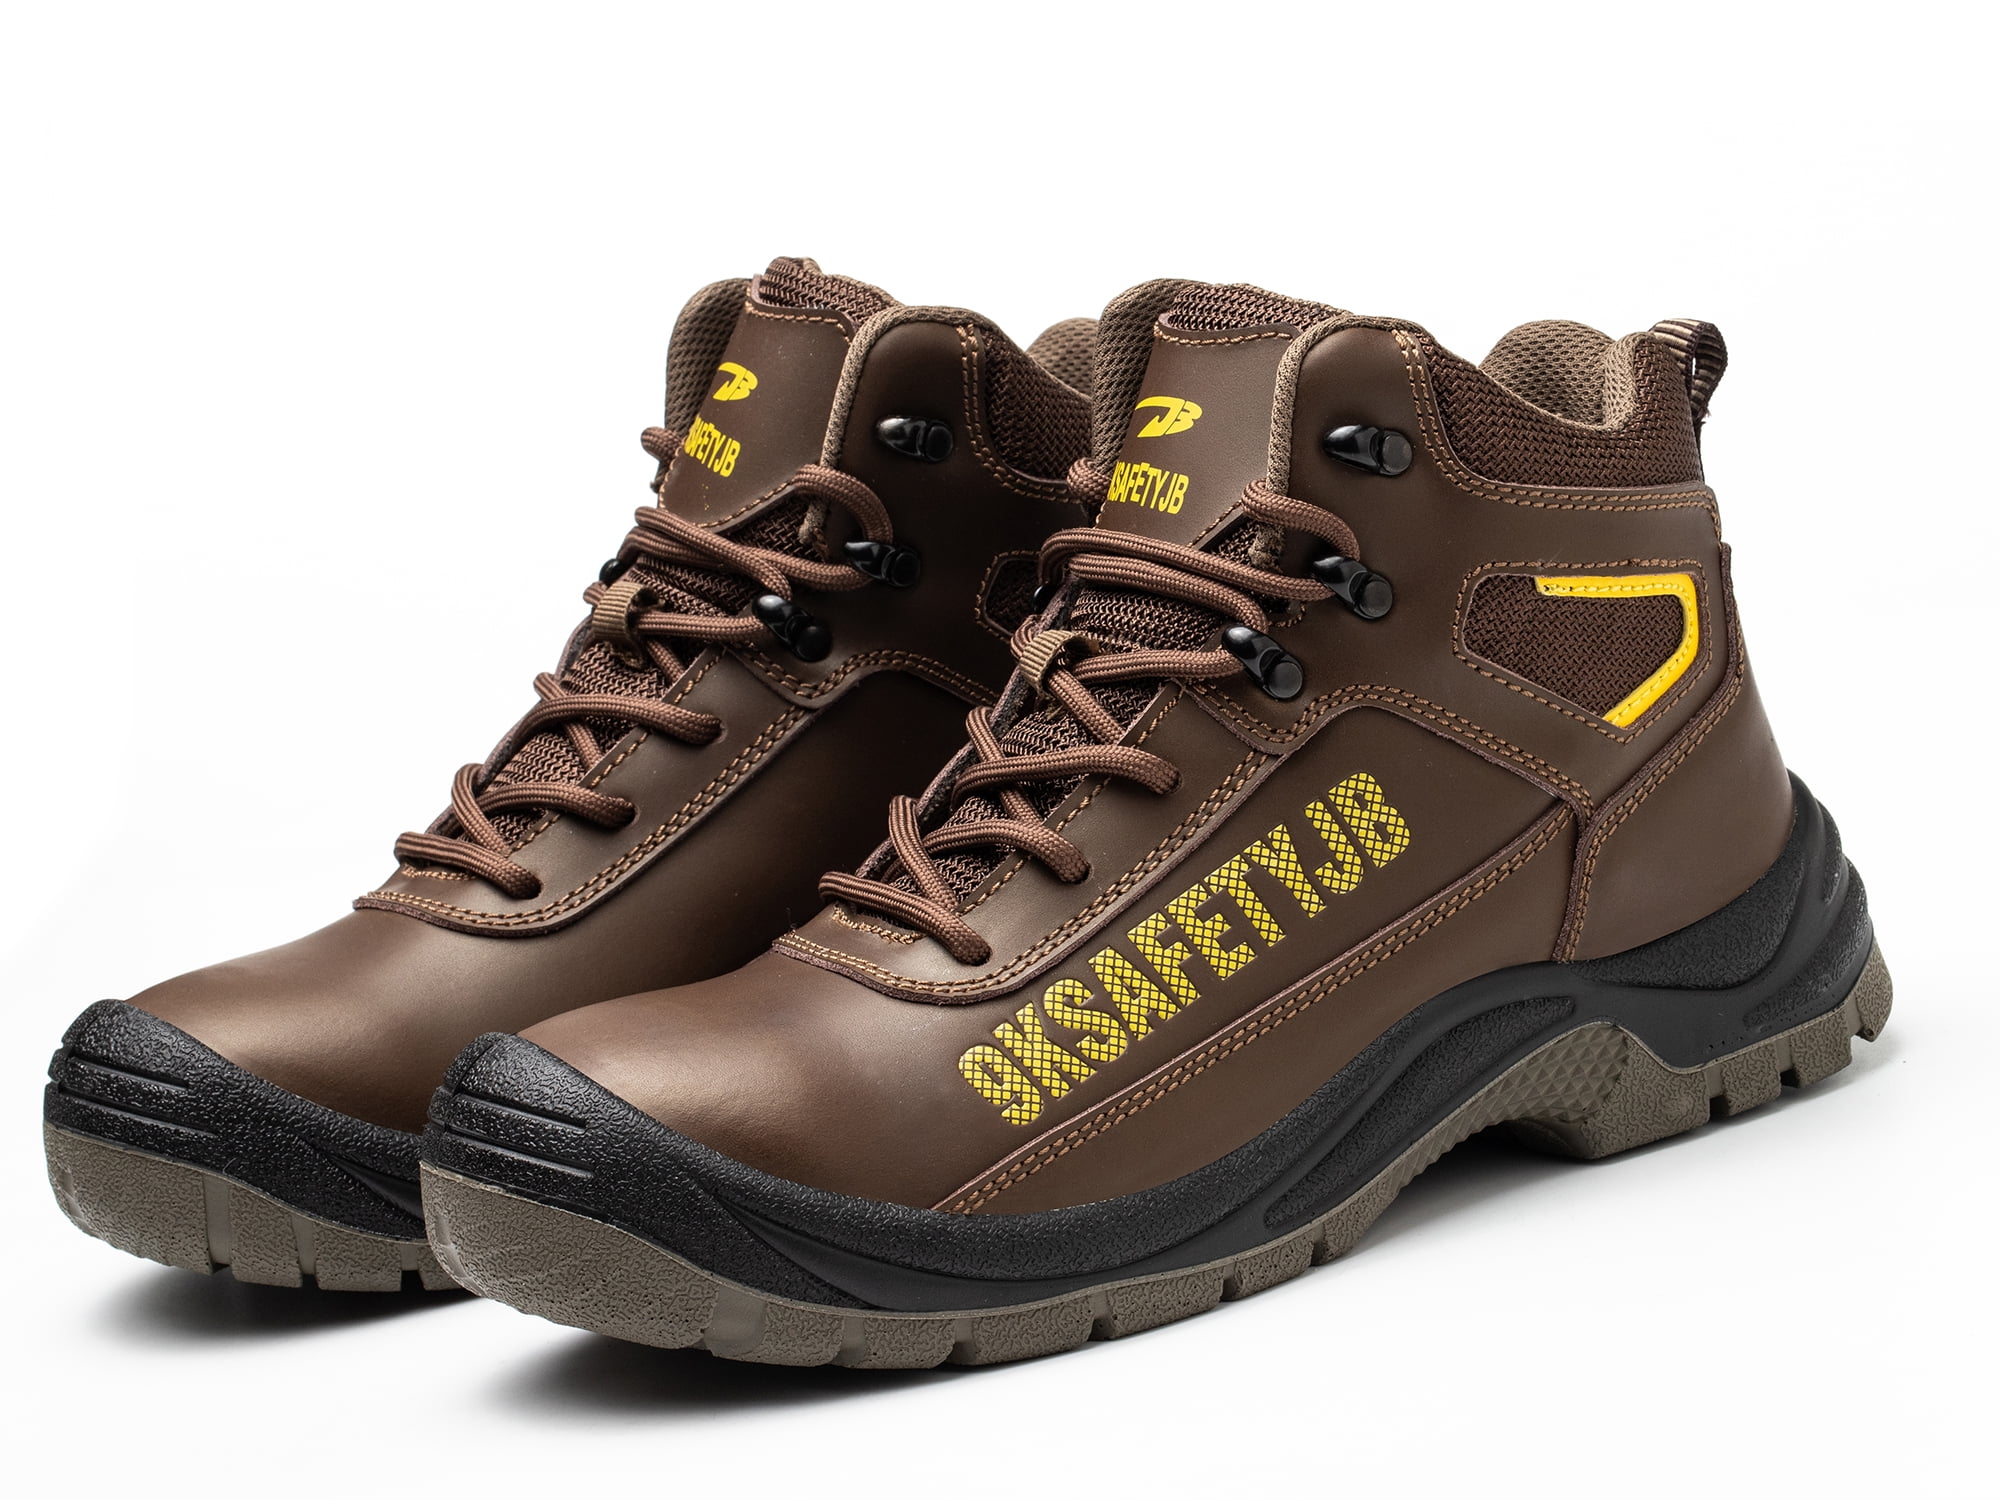 Men's Safety Shoes Steel Toe Work Boots Outdoor Hiking Cuhsioned Sports Trainers 